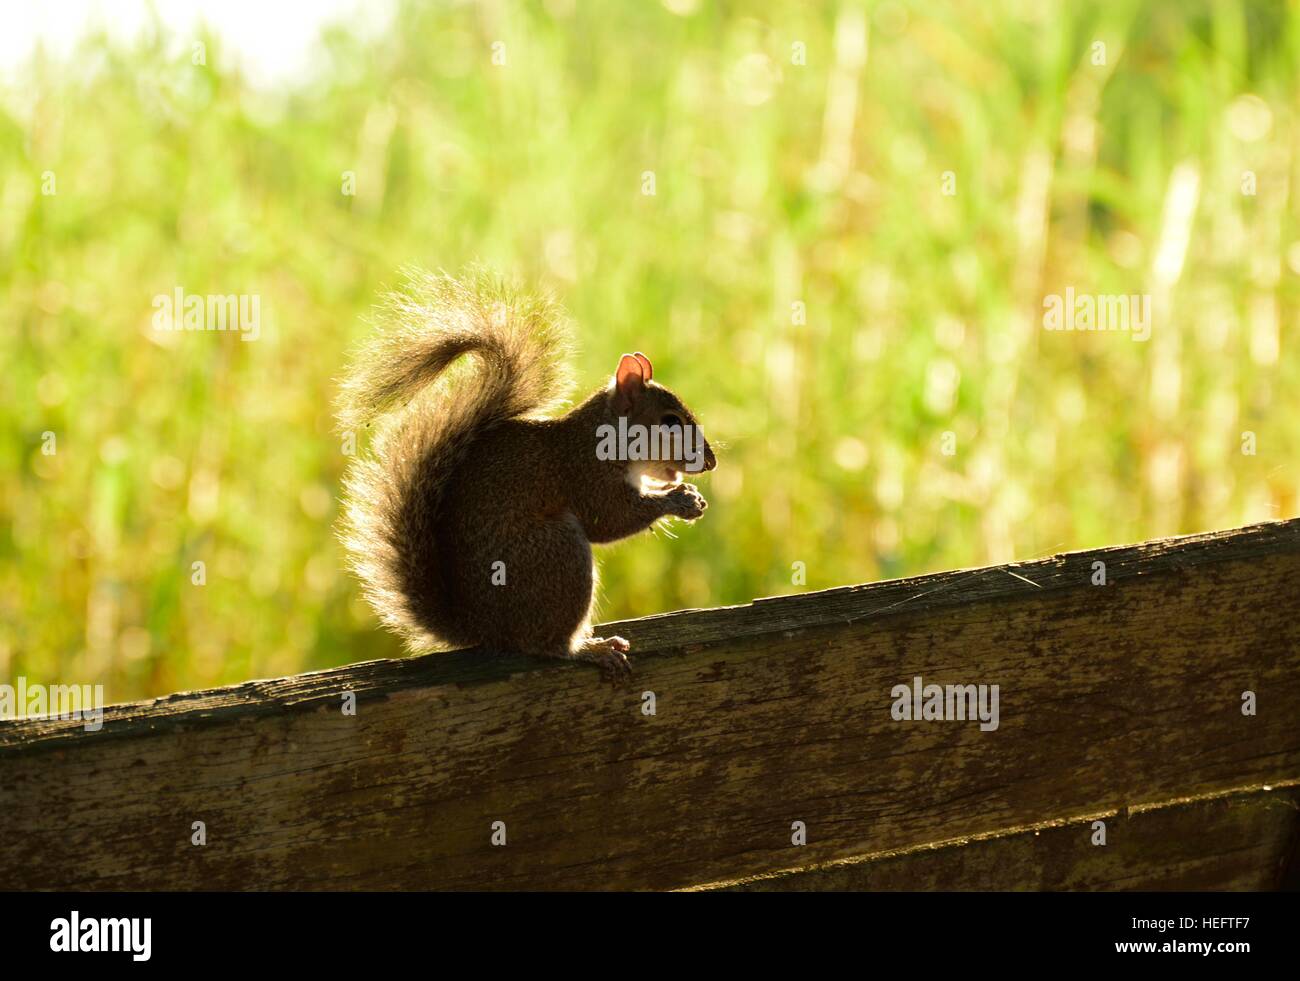 Eastern Gray Squirrel  other wise known as Sciurus carolinensis  resting on a park bench in the Florida sunshine. Stock Photo